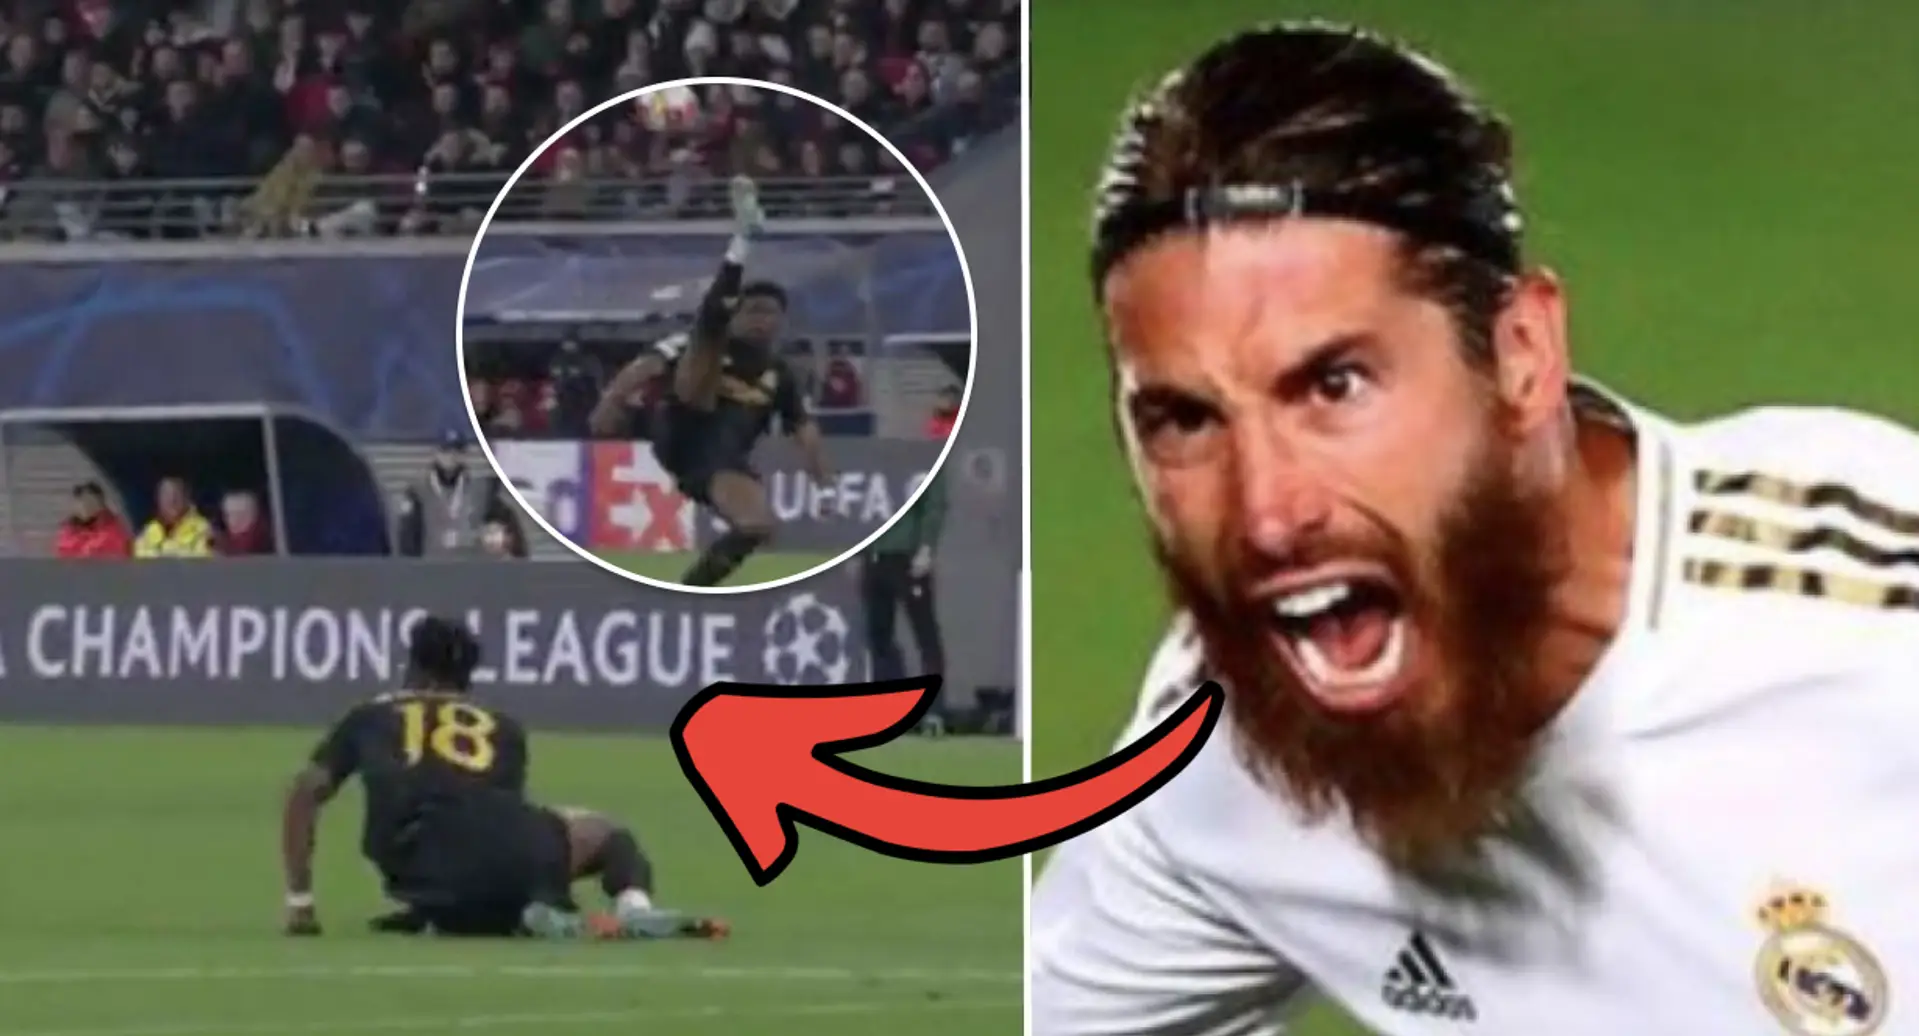 'Bro is moving like a prime Ramos': Madridistas react as Tchouameni pulls off insane acrobatic clearance to deny Leipzig